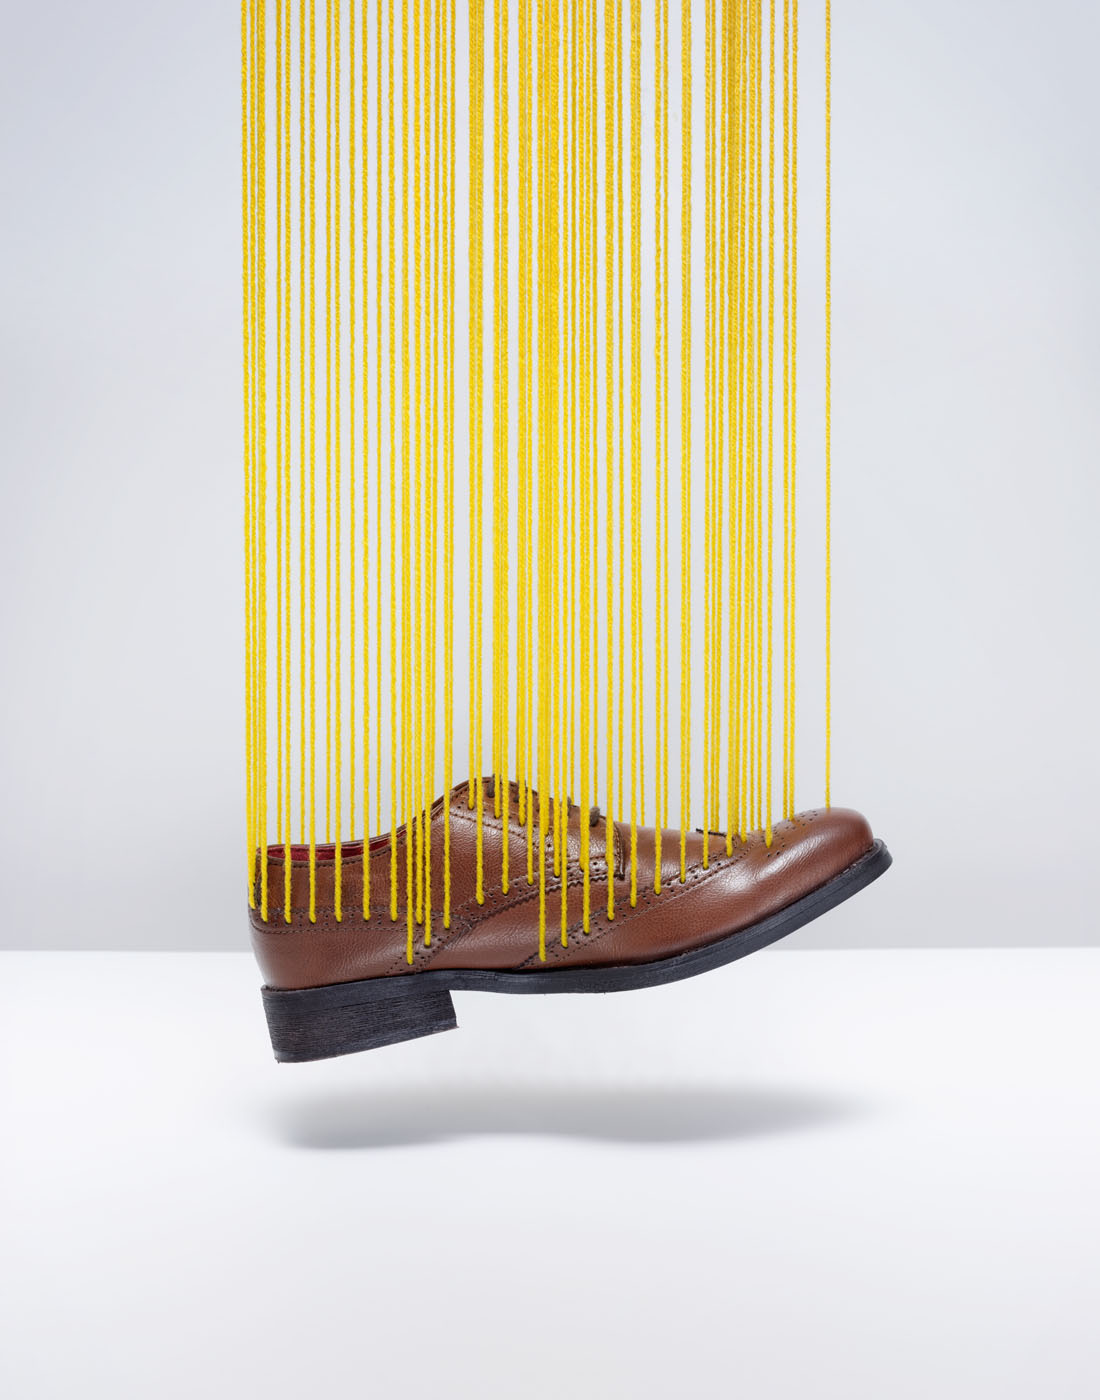 Suspended brogue shoe with yellow wool by Alexander Kent London based still life and product photographer.